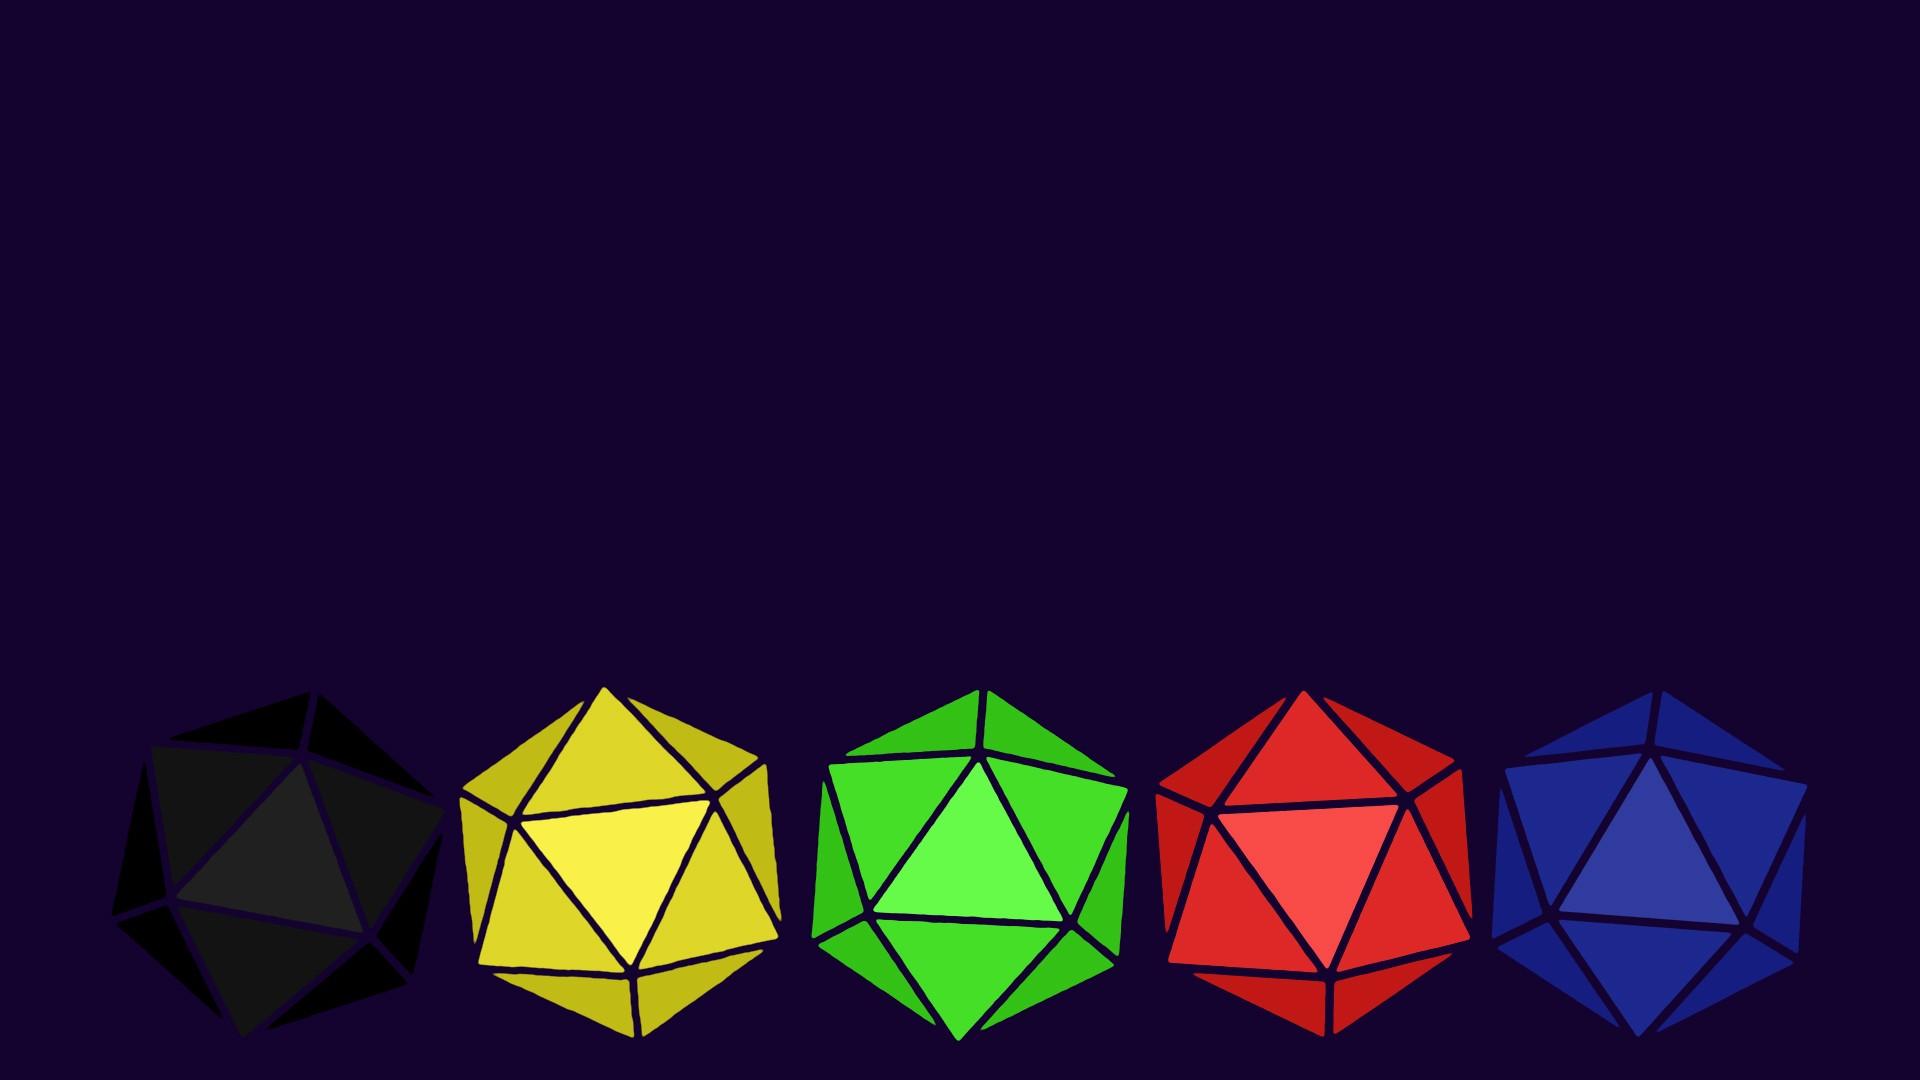 Wanted a new wallpaper for my phone Theres something so satisfying about  metal dice  rDicePorn